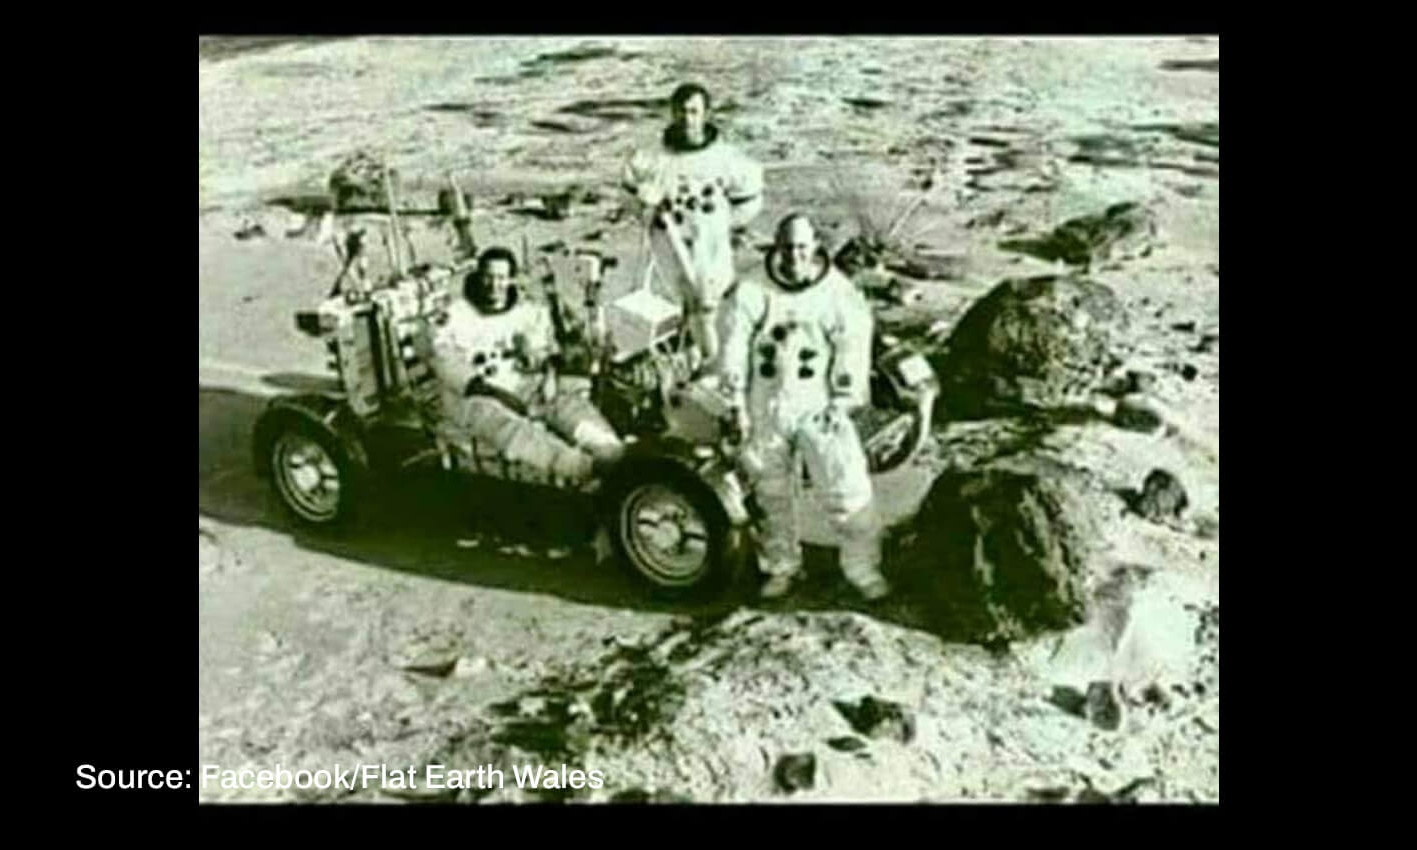 Astronauts on the Moon removed their helmets to pose for a photograph.